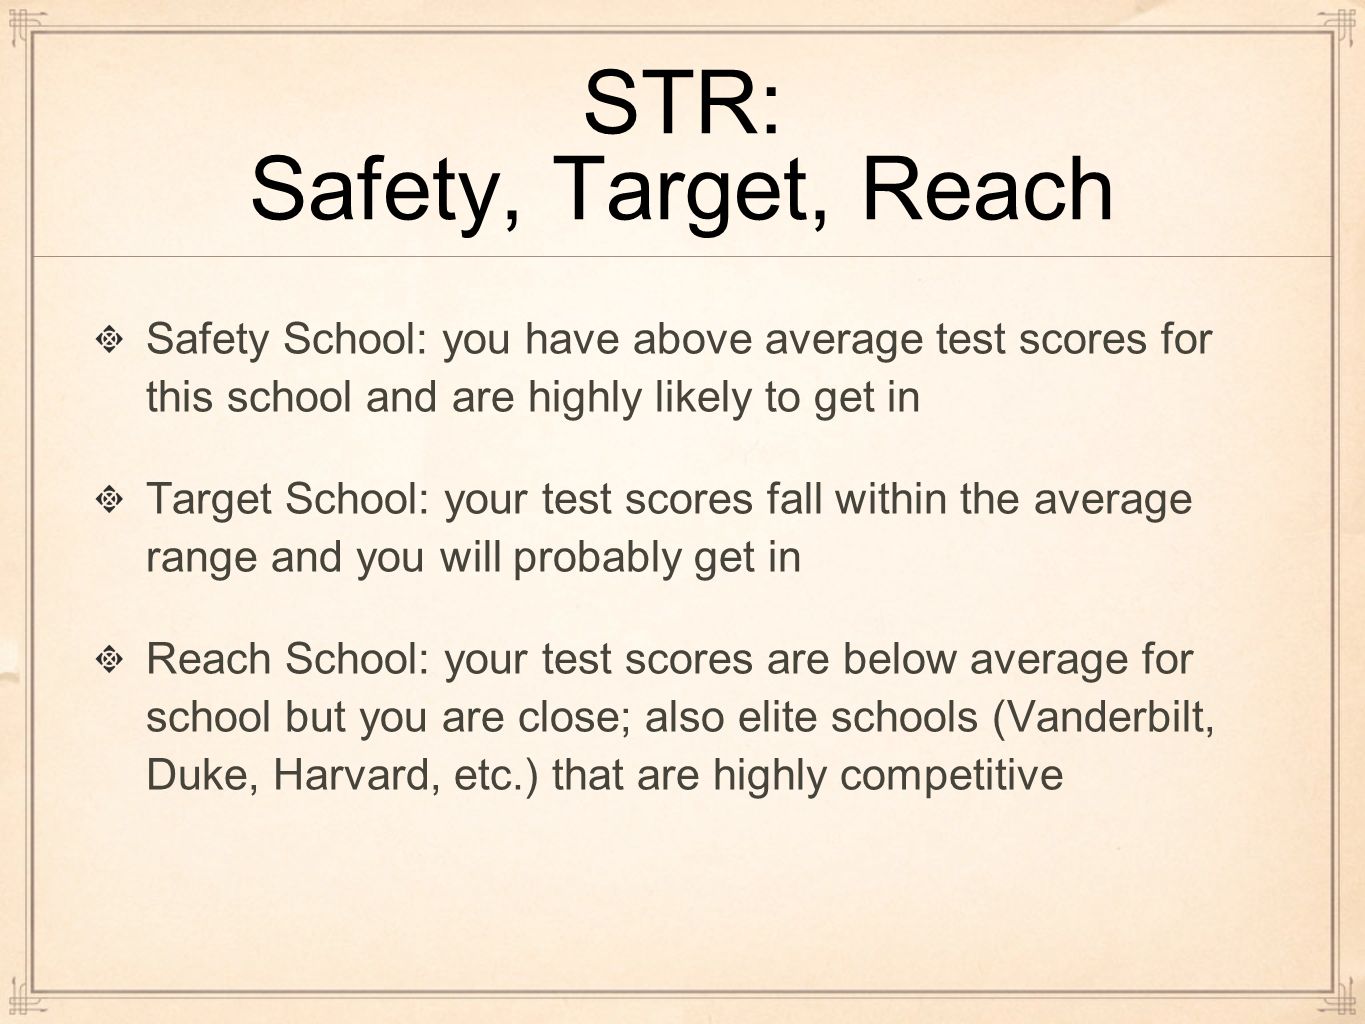 STR: Safety, Target, Reach Safety School: you have above average test scores for this school and are highly likely to get in Target School: your test scores fall within the average range and you will probably get in Reach School: your test scores are below average for school but you are close; also elite schools (Vanderbilt, Duke, Harvard, etc.) that are highly competitive